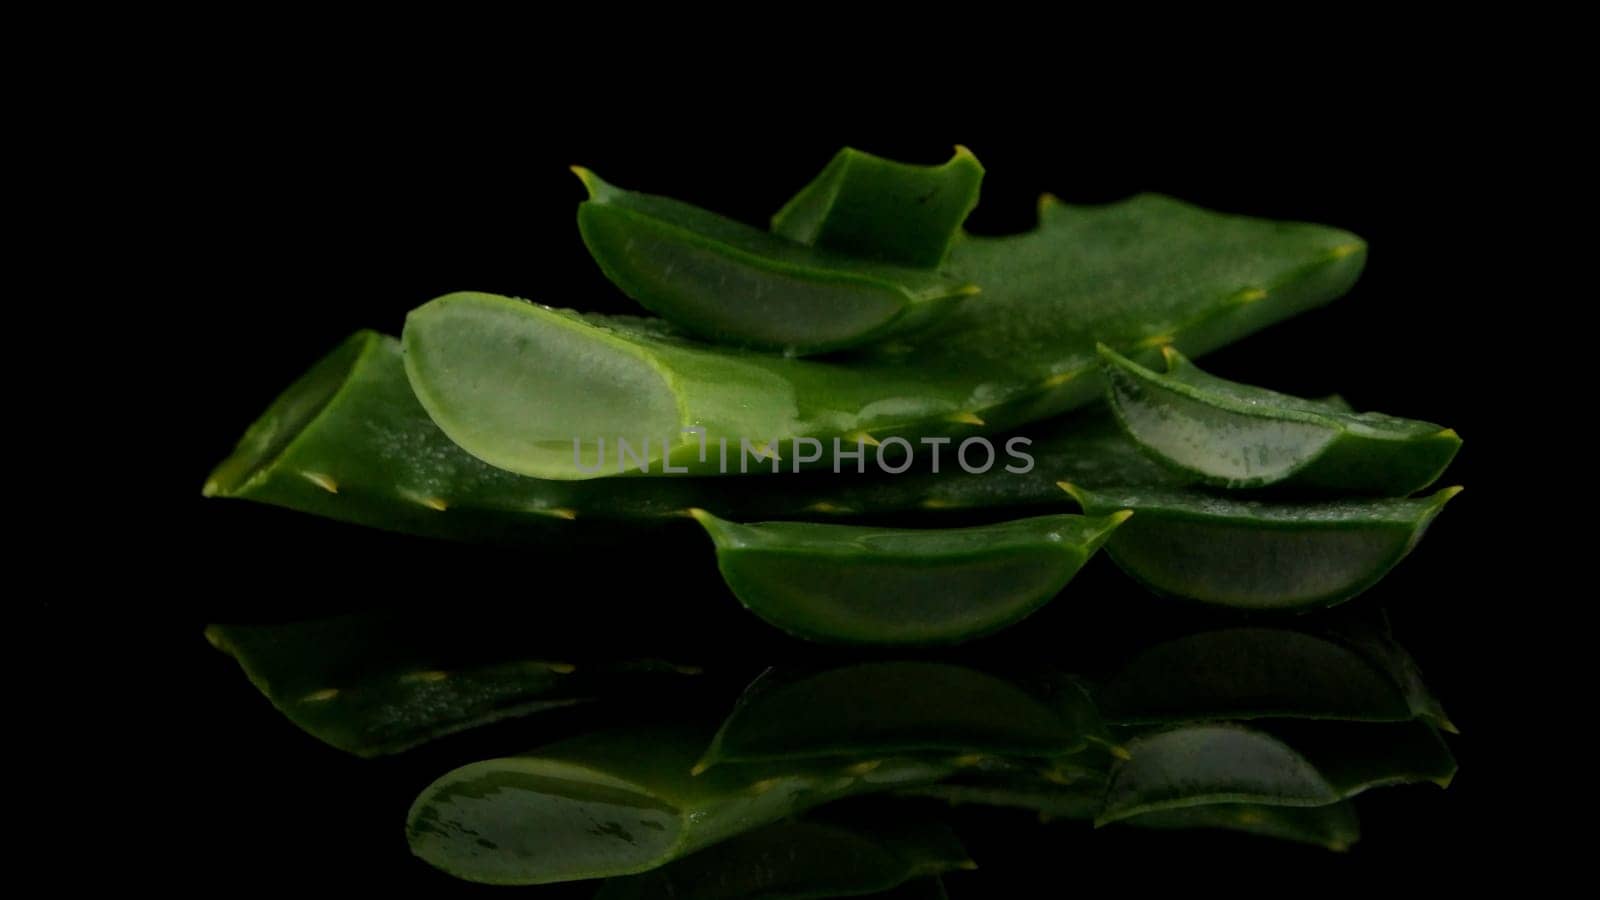 Sliced aloe leaf and water drops isolated on black background.